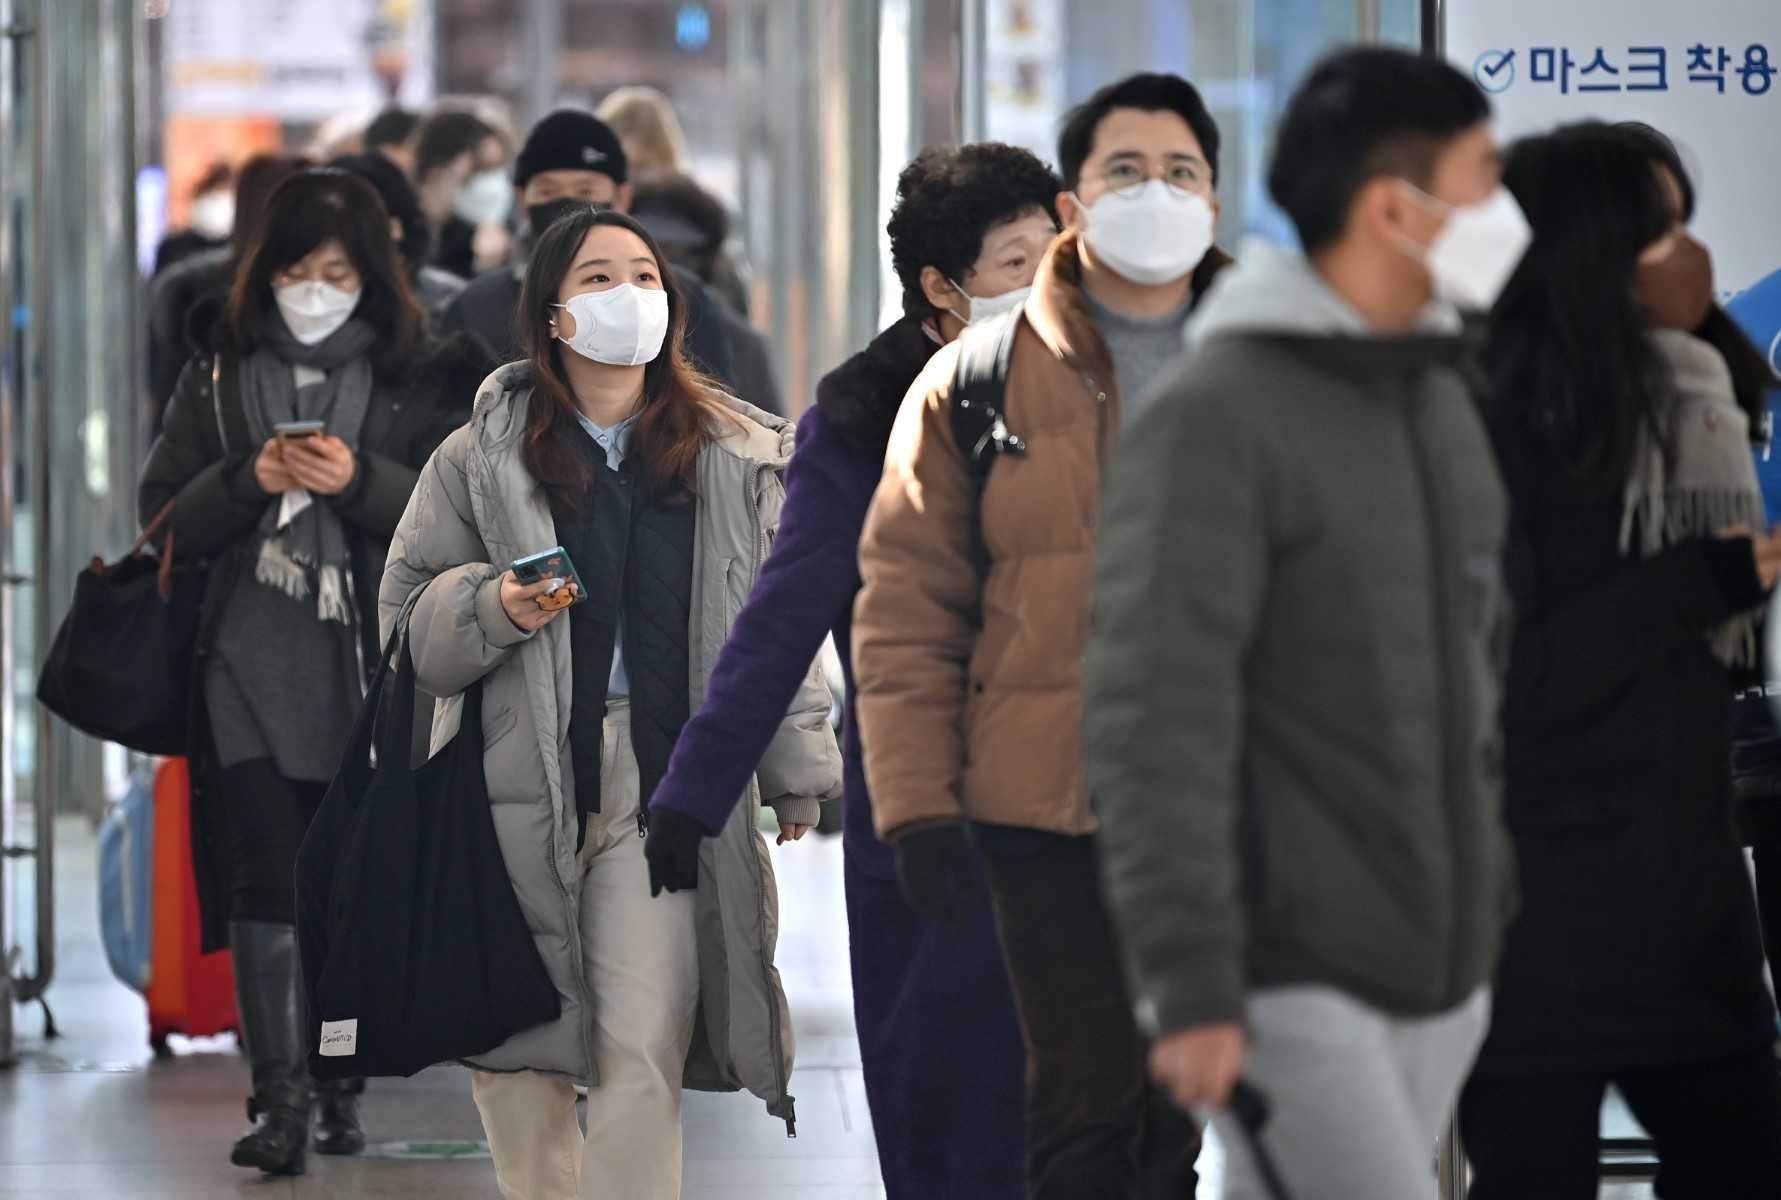 People wearing face masks walk through a railway station in Seoul on Feb 18. Photo: AFP